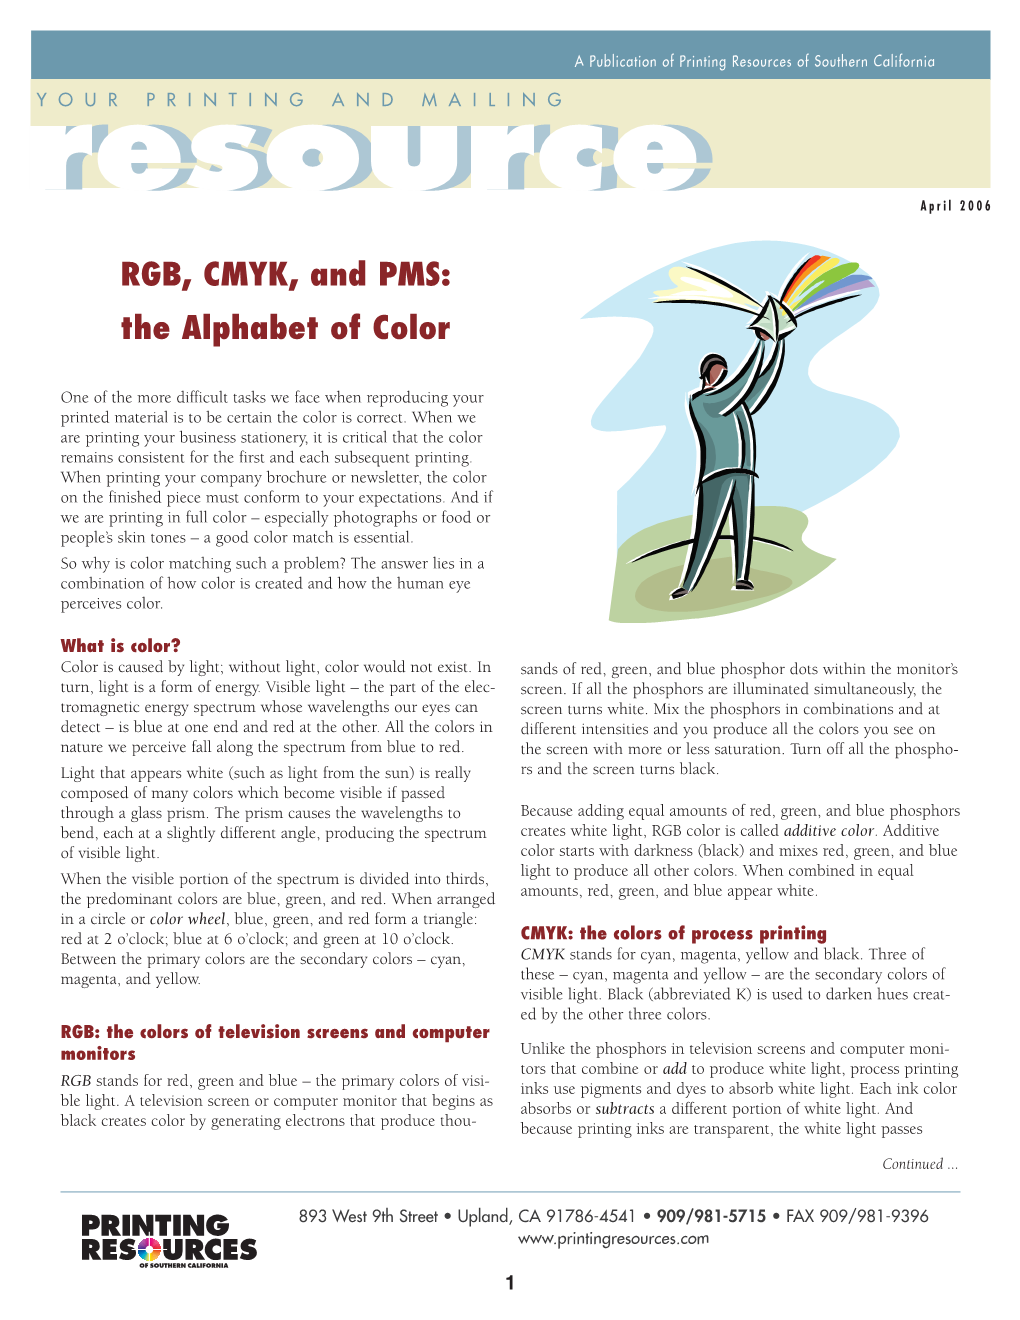 RGB, CMYK, and PMS: the Alphabet of Color